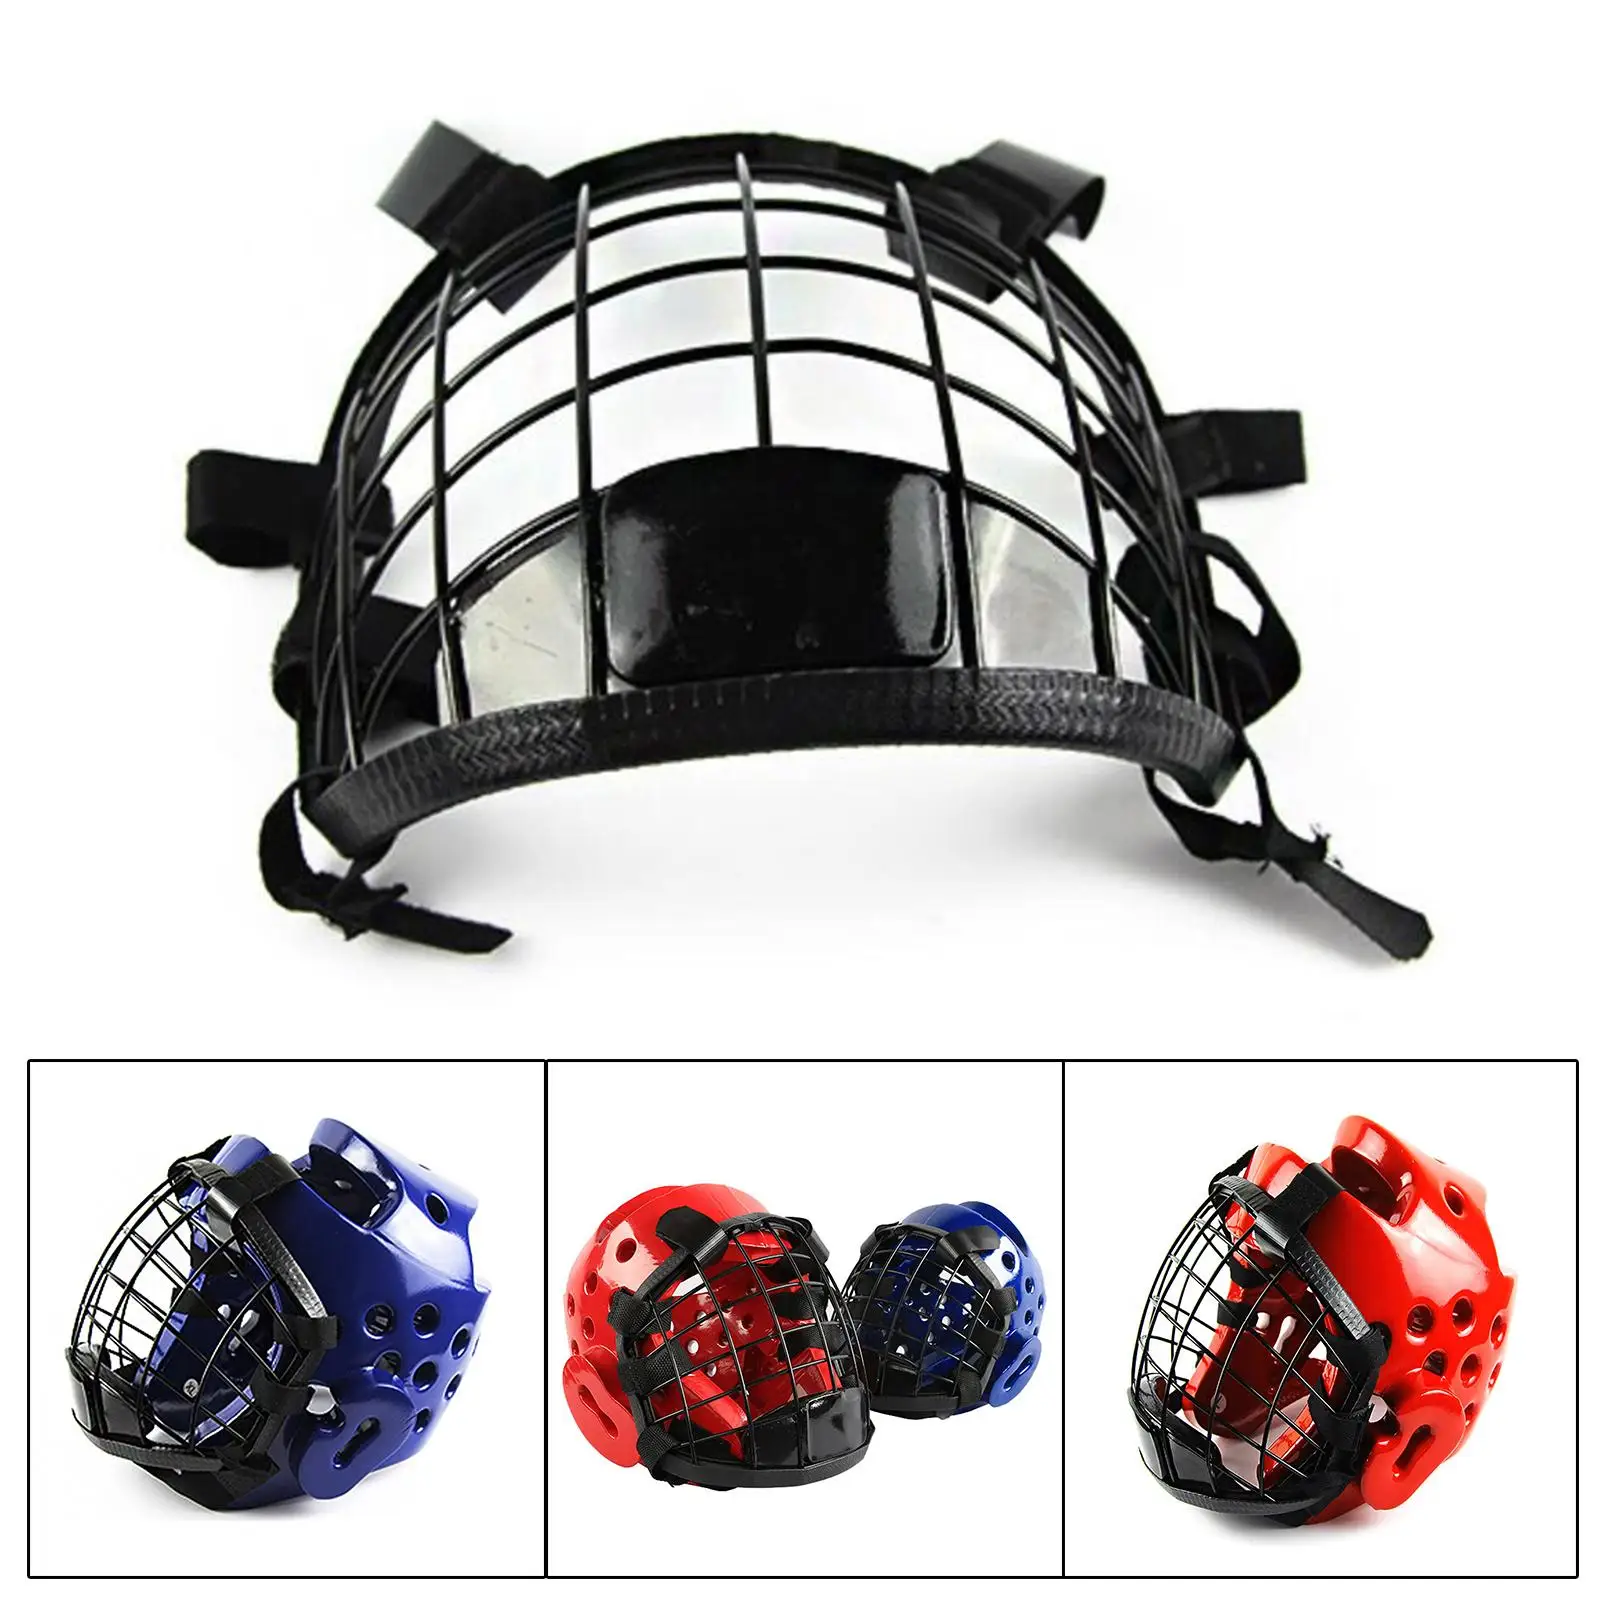 Metal Taekwondo Guard Child Removable Face Protection Protective Head Cover for Martial Arts Boxing Kickboxing Grappling Karate